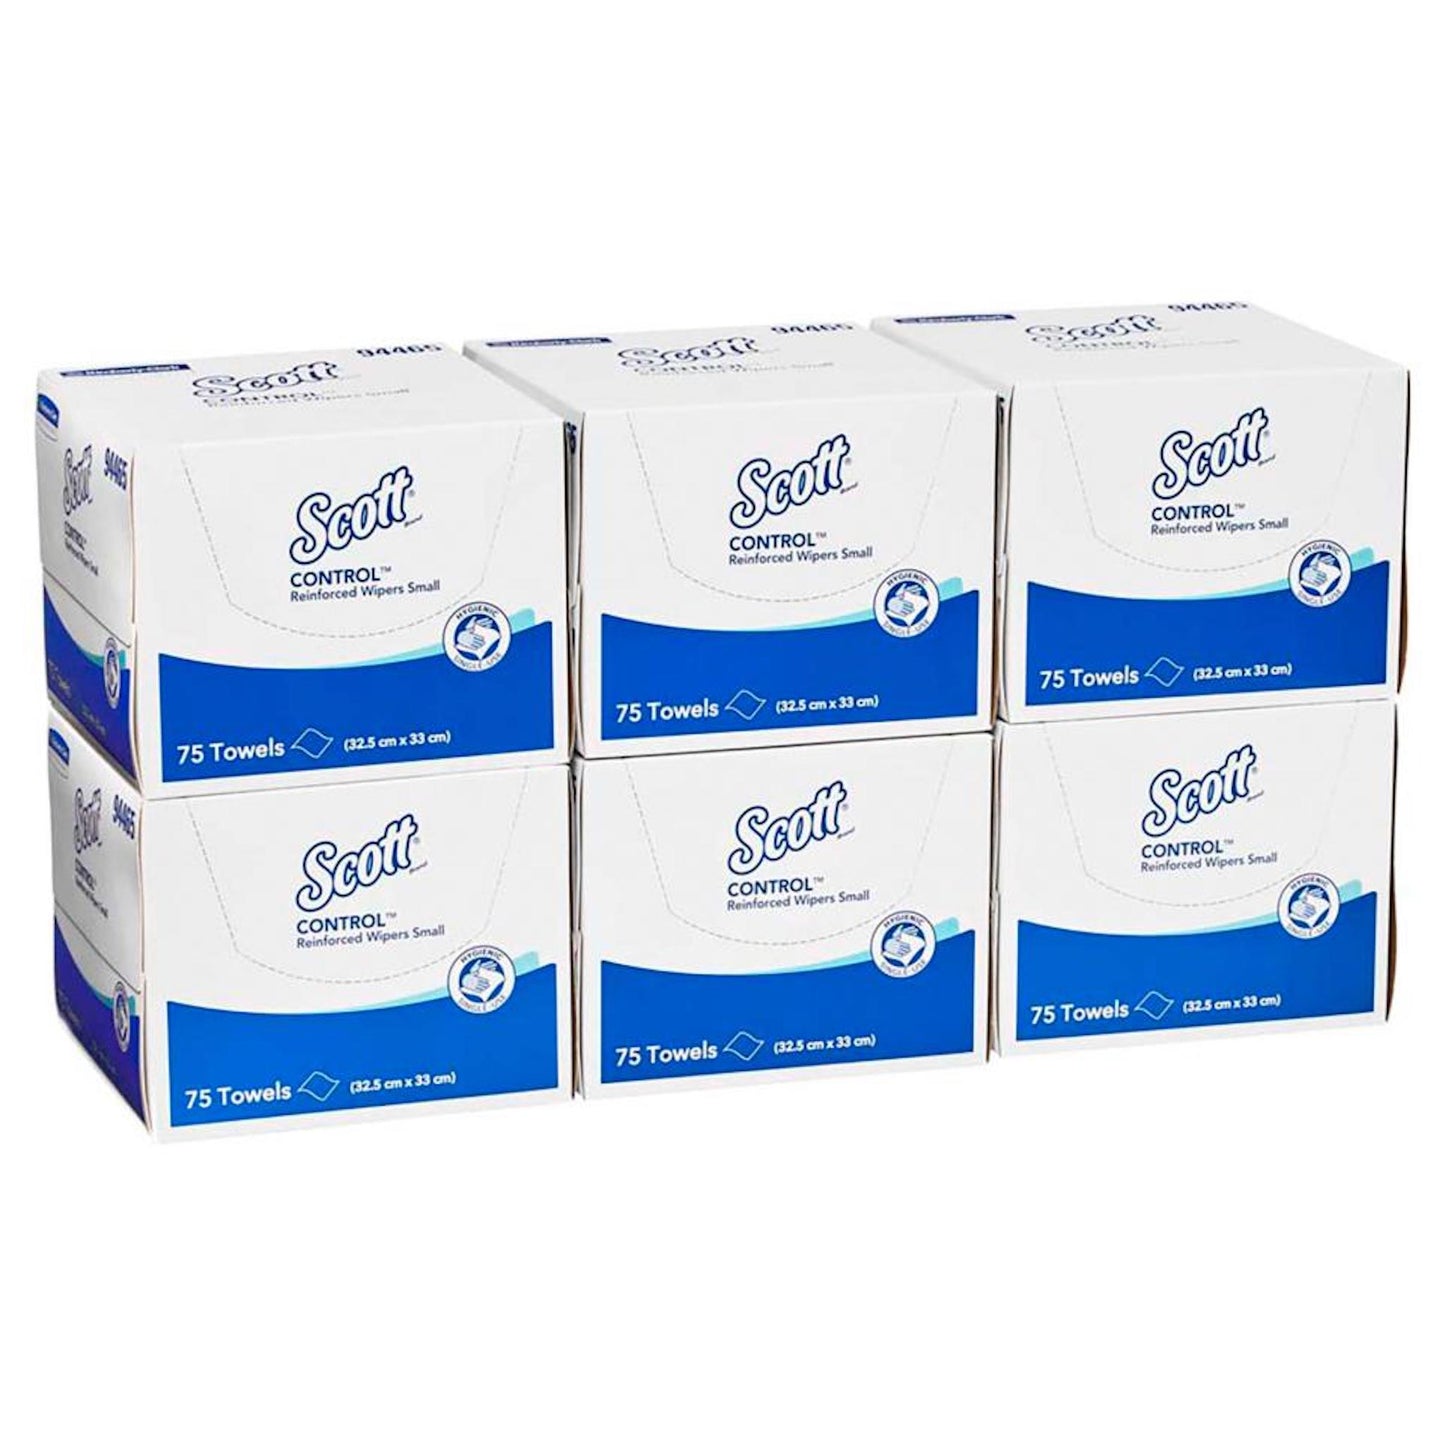 Scott Control 94465 Reinforced Mulitipurpose Wipers Small White Pack 75 Carton 6